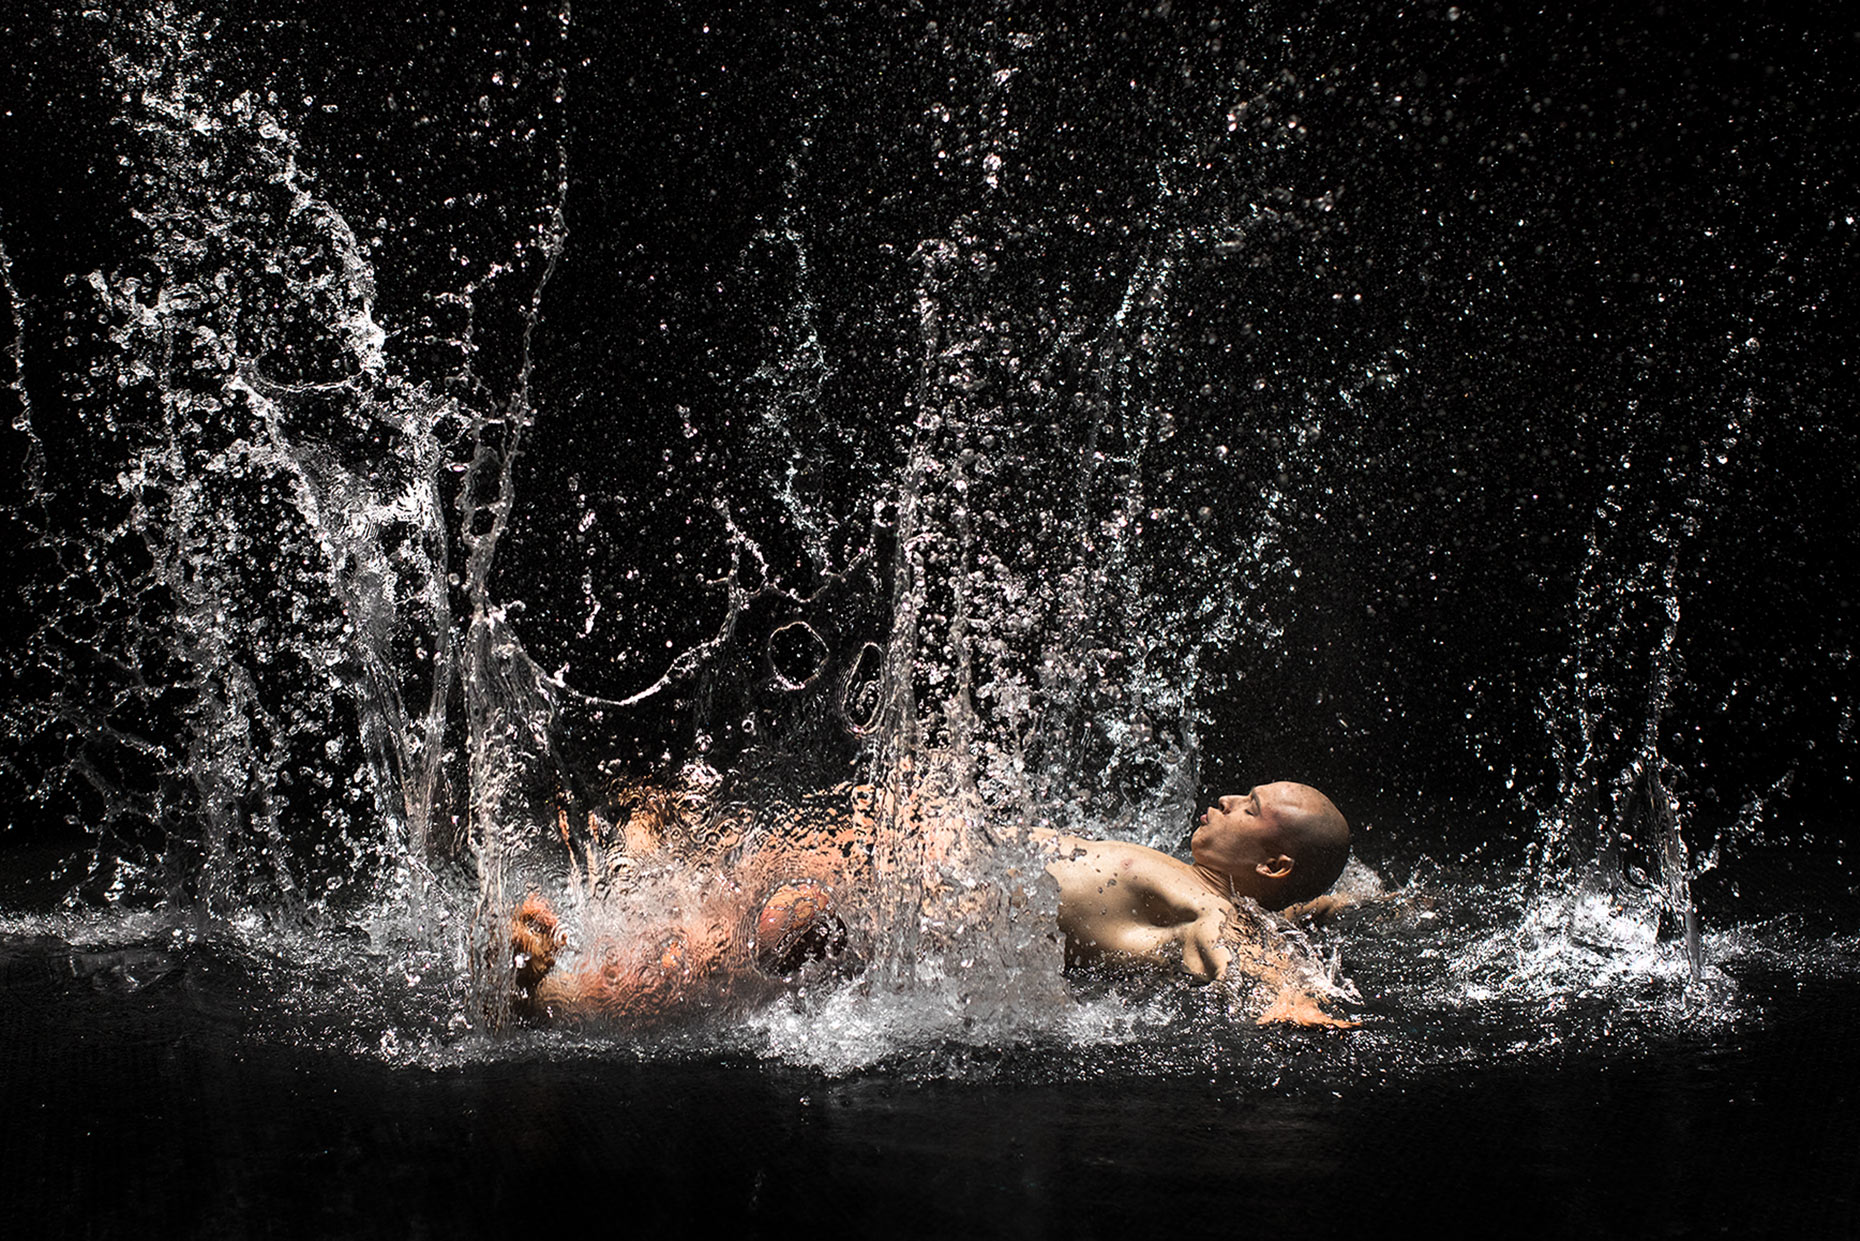 An acrobat hitting the water flat on his back. Water splash surrounding a man . Advertising photo for Le Rêve the show at Wynn Las Vegas. Cirque du Soleil